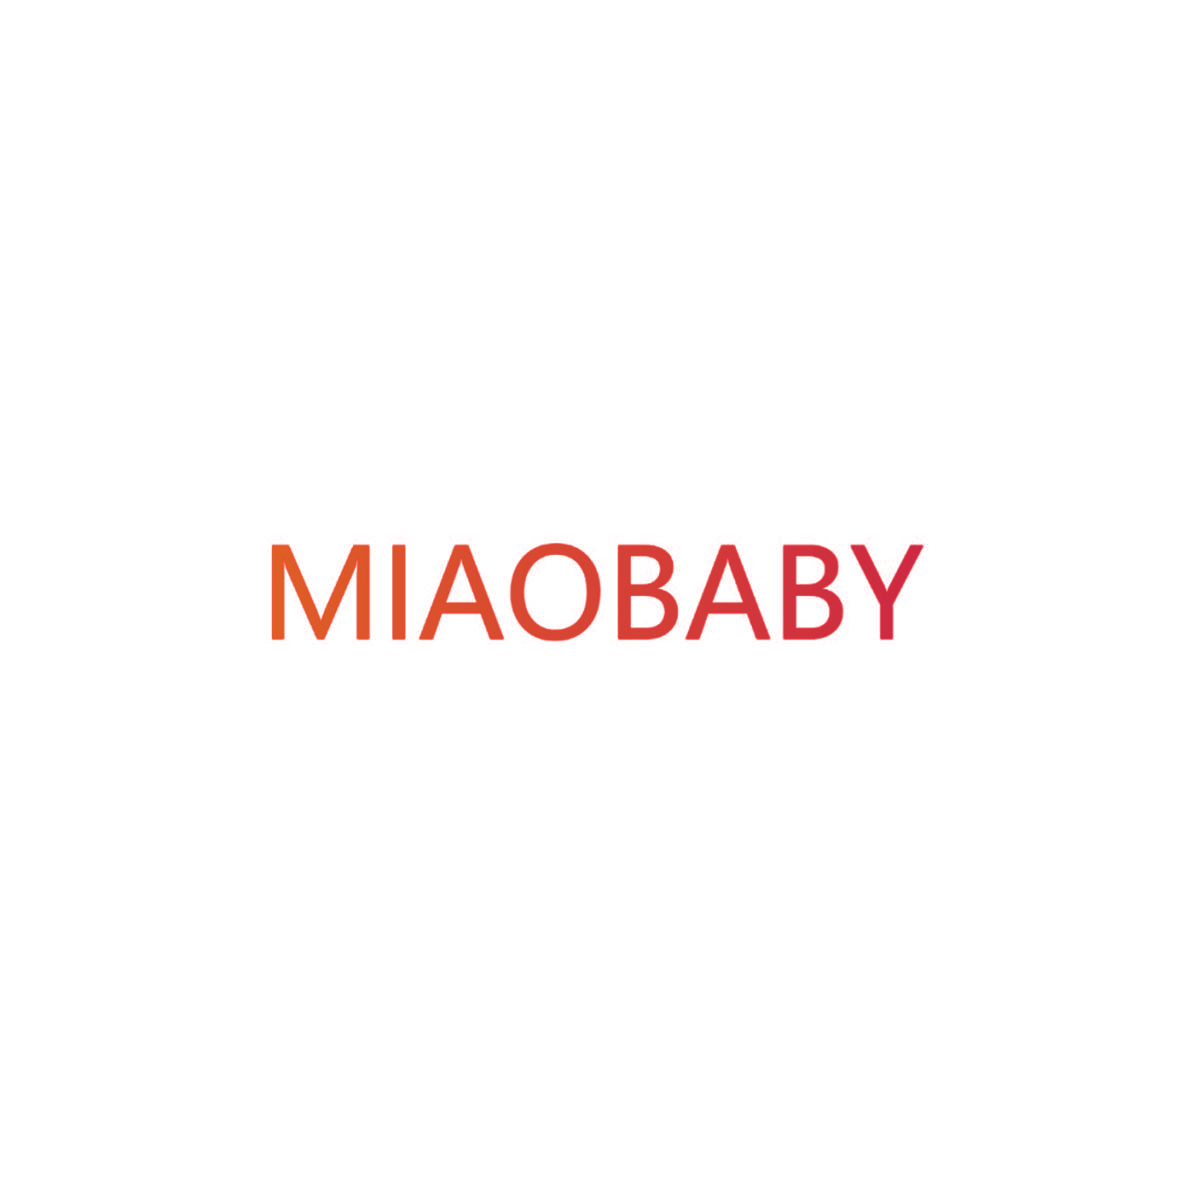 MIAOBABY